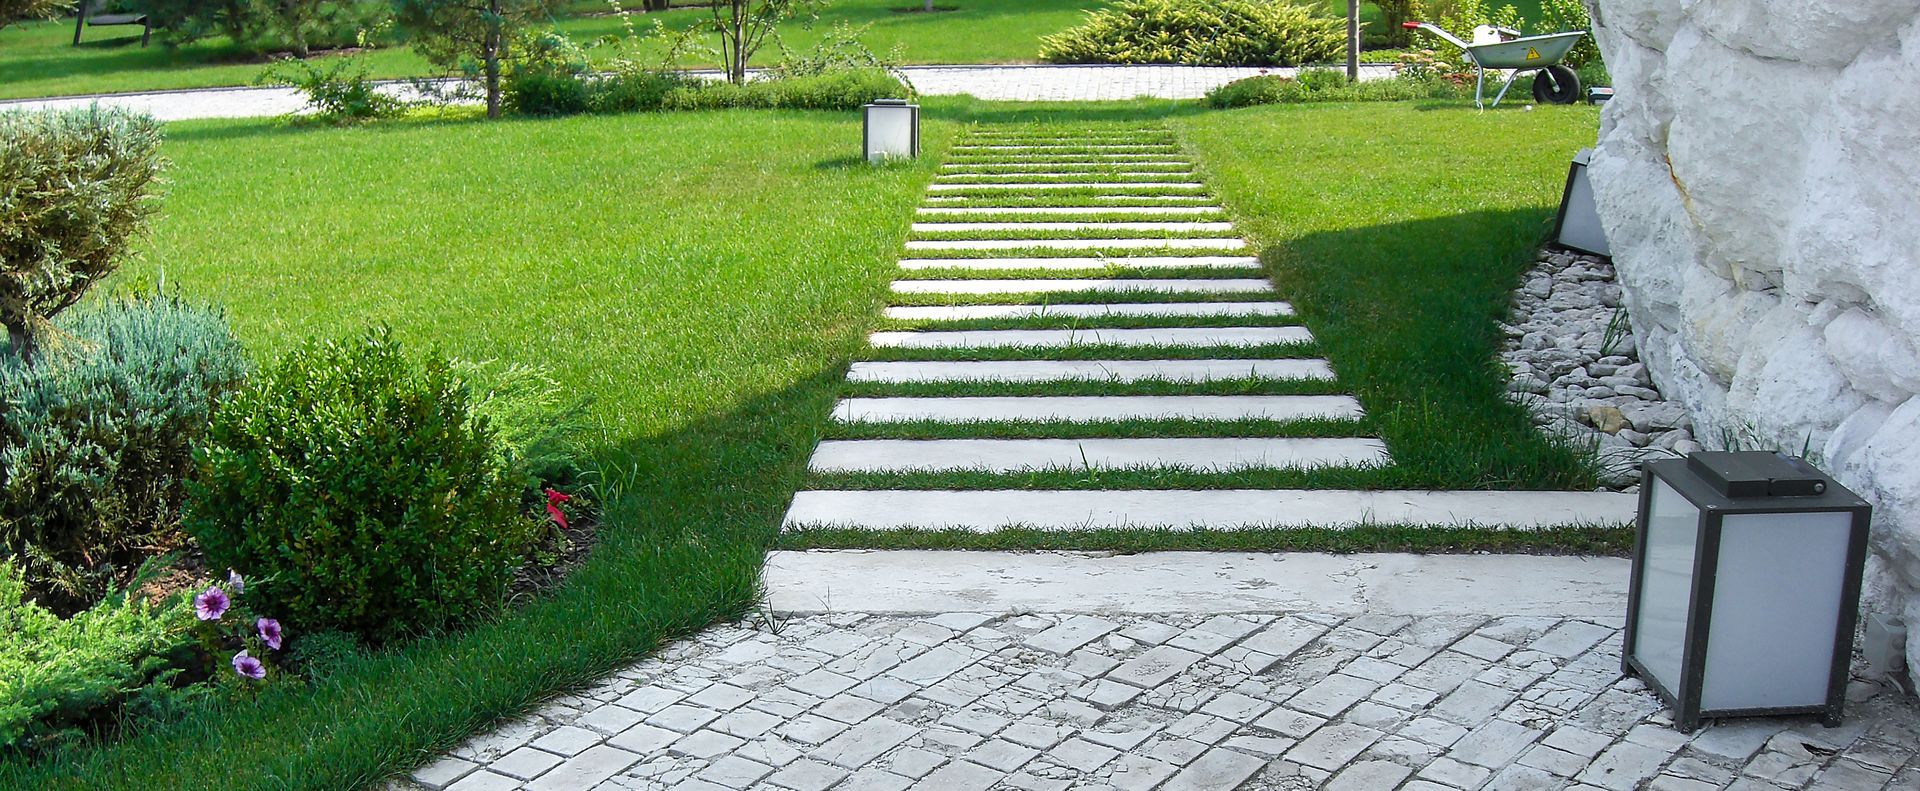 custom concrete paver pathway leading to a driveway